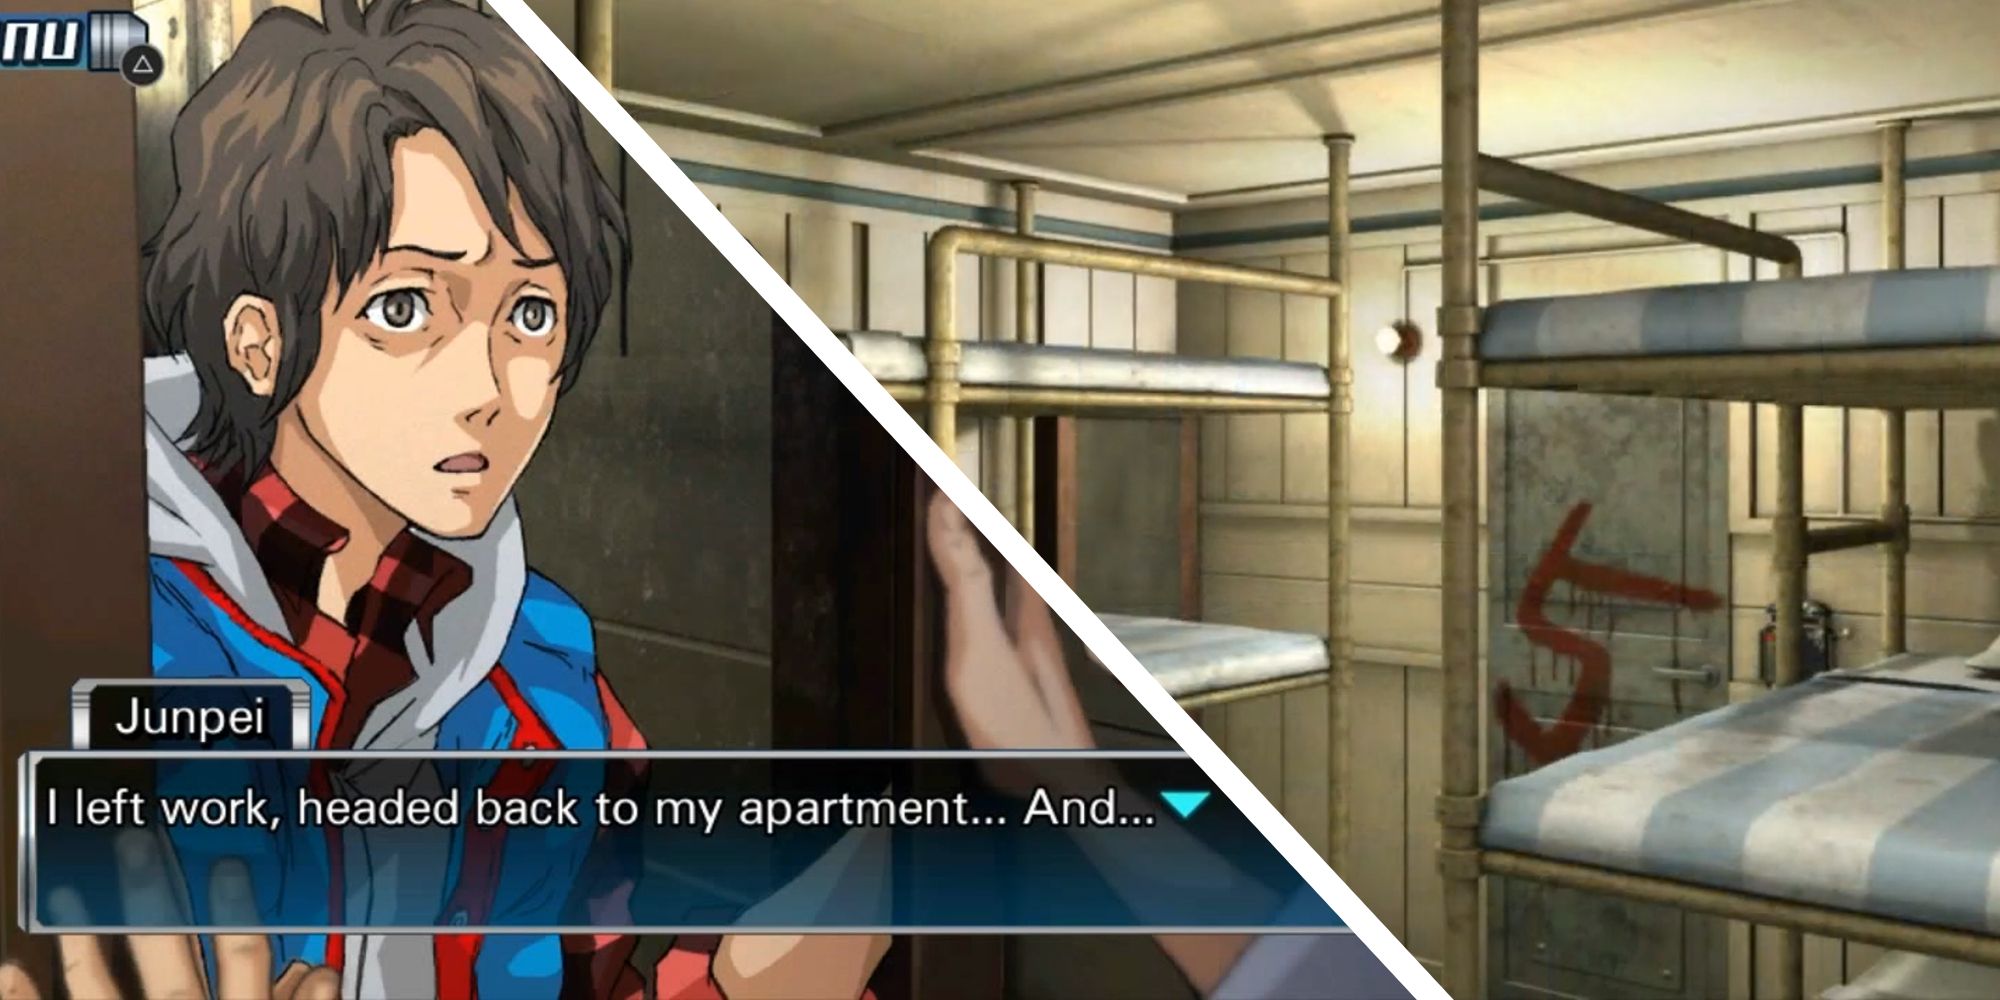 image of junpei looking into the mirror, next to image of 3rd class cabin